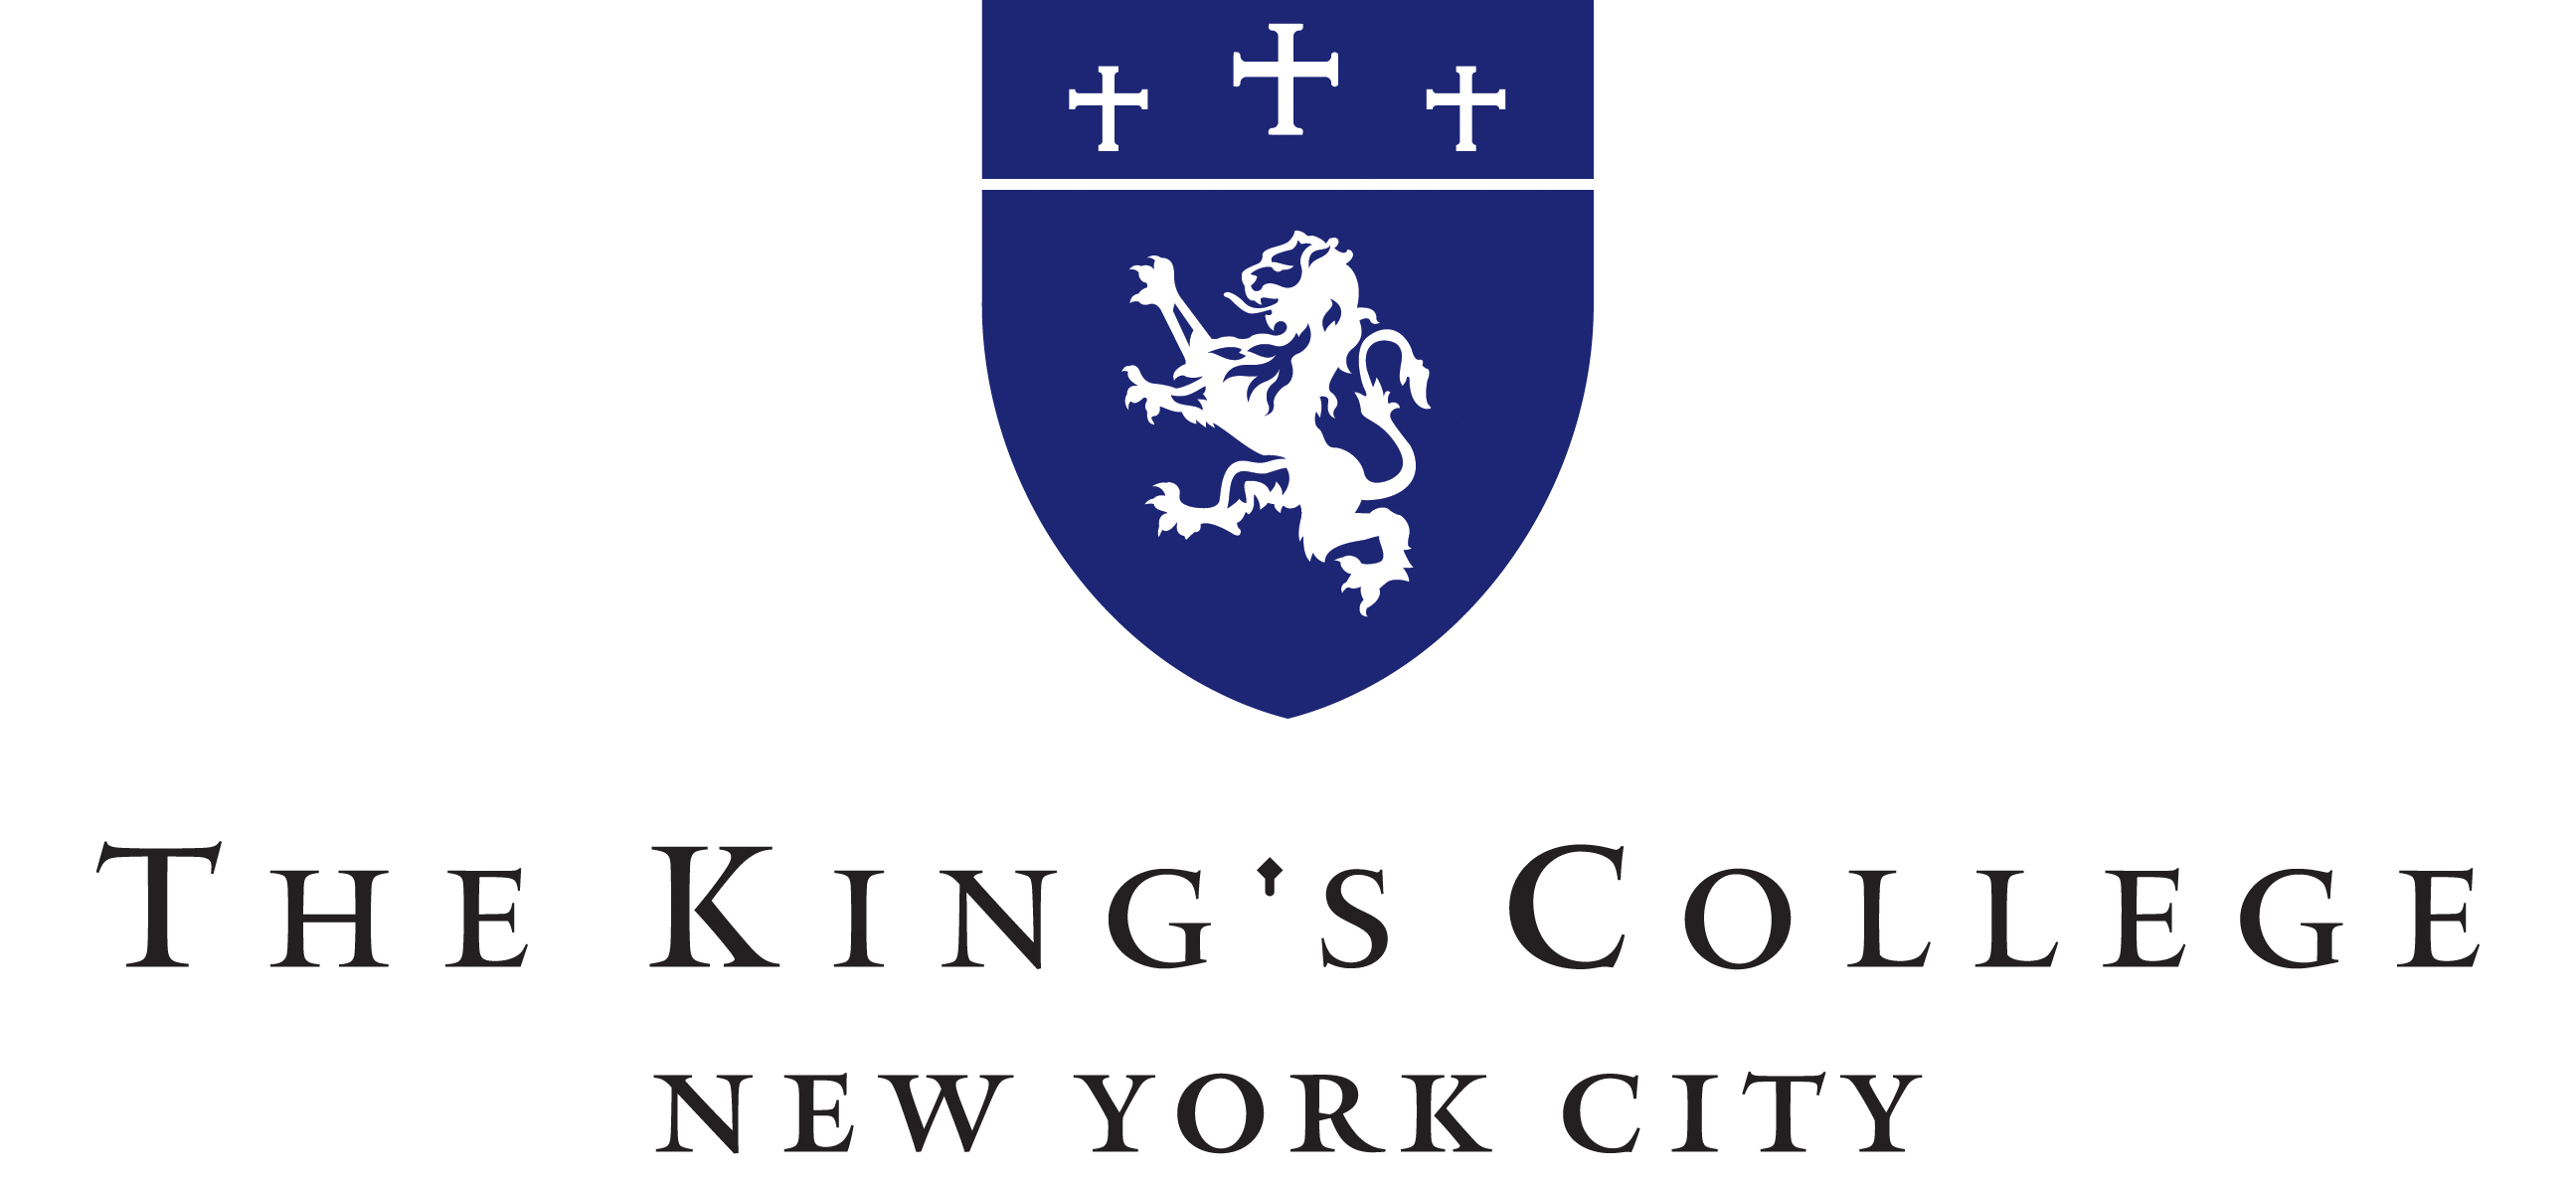 http://pressreleaseheadlines.com/wp-content/Cimy_User_Extra_Fields/The Kings College/The-Kings-College-New-York-City.jpg